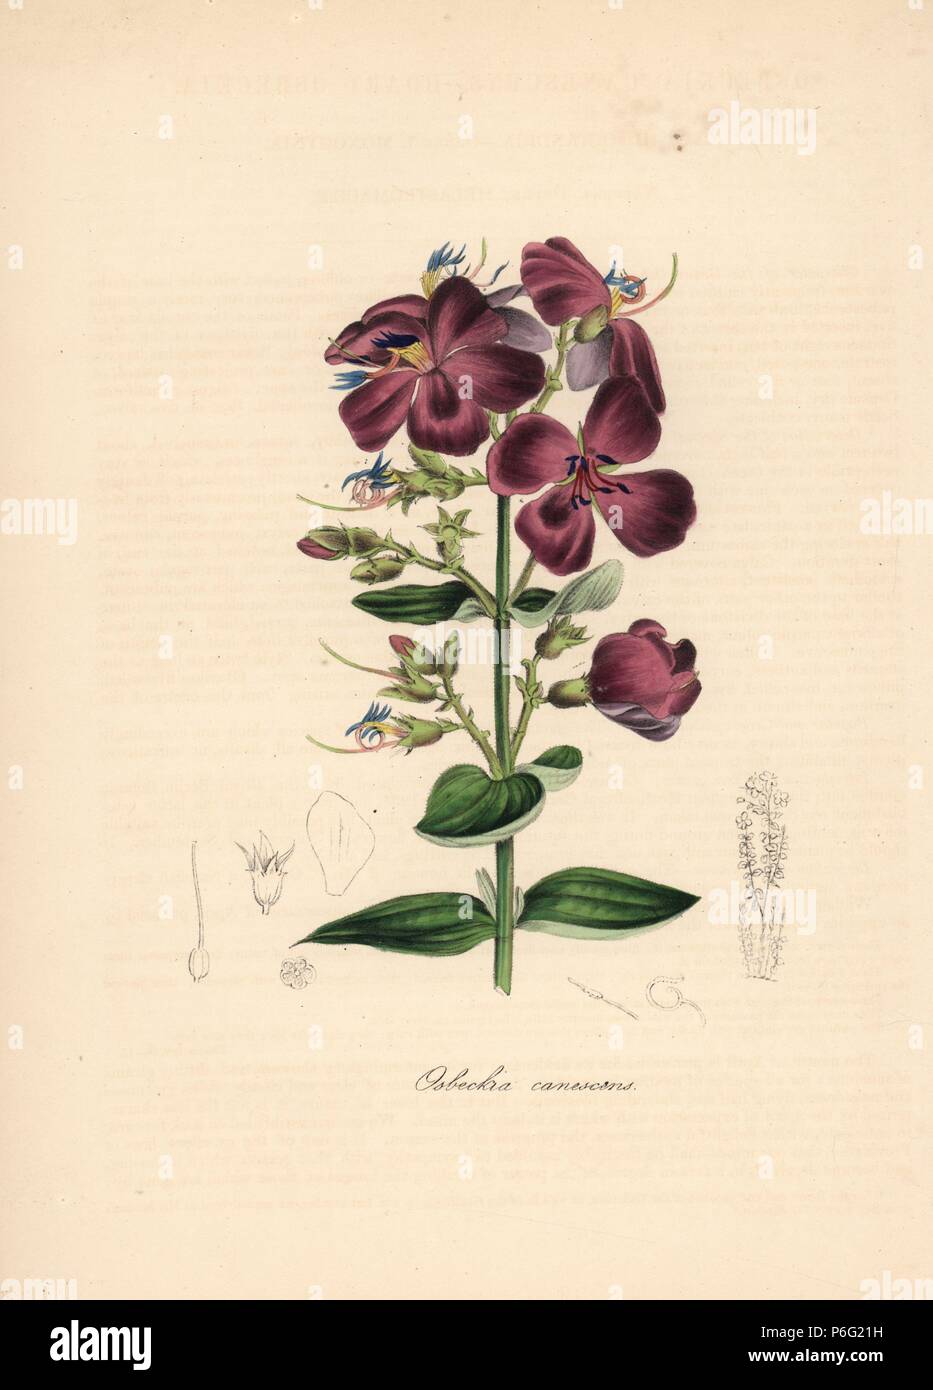 Heterotis canescens (Osbeckia canescens). Handcoloured zincograph by C. Chabot drawn by Miss M. A. Burnett from her 'Plantae Utiliores: or Illustrations of Useful Plants,' Whittaker, London, 1842. Miss Burnett drew the botanical illustrations, but the text was chiefly by her late brother, British botanist Gilbert Thomas Burnett (1800-1835). Stock Photo